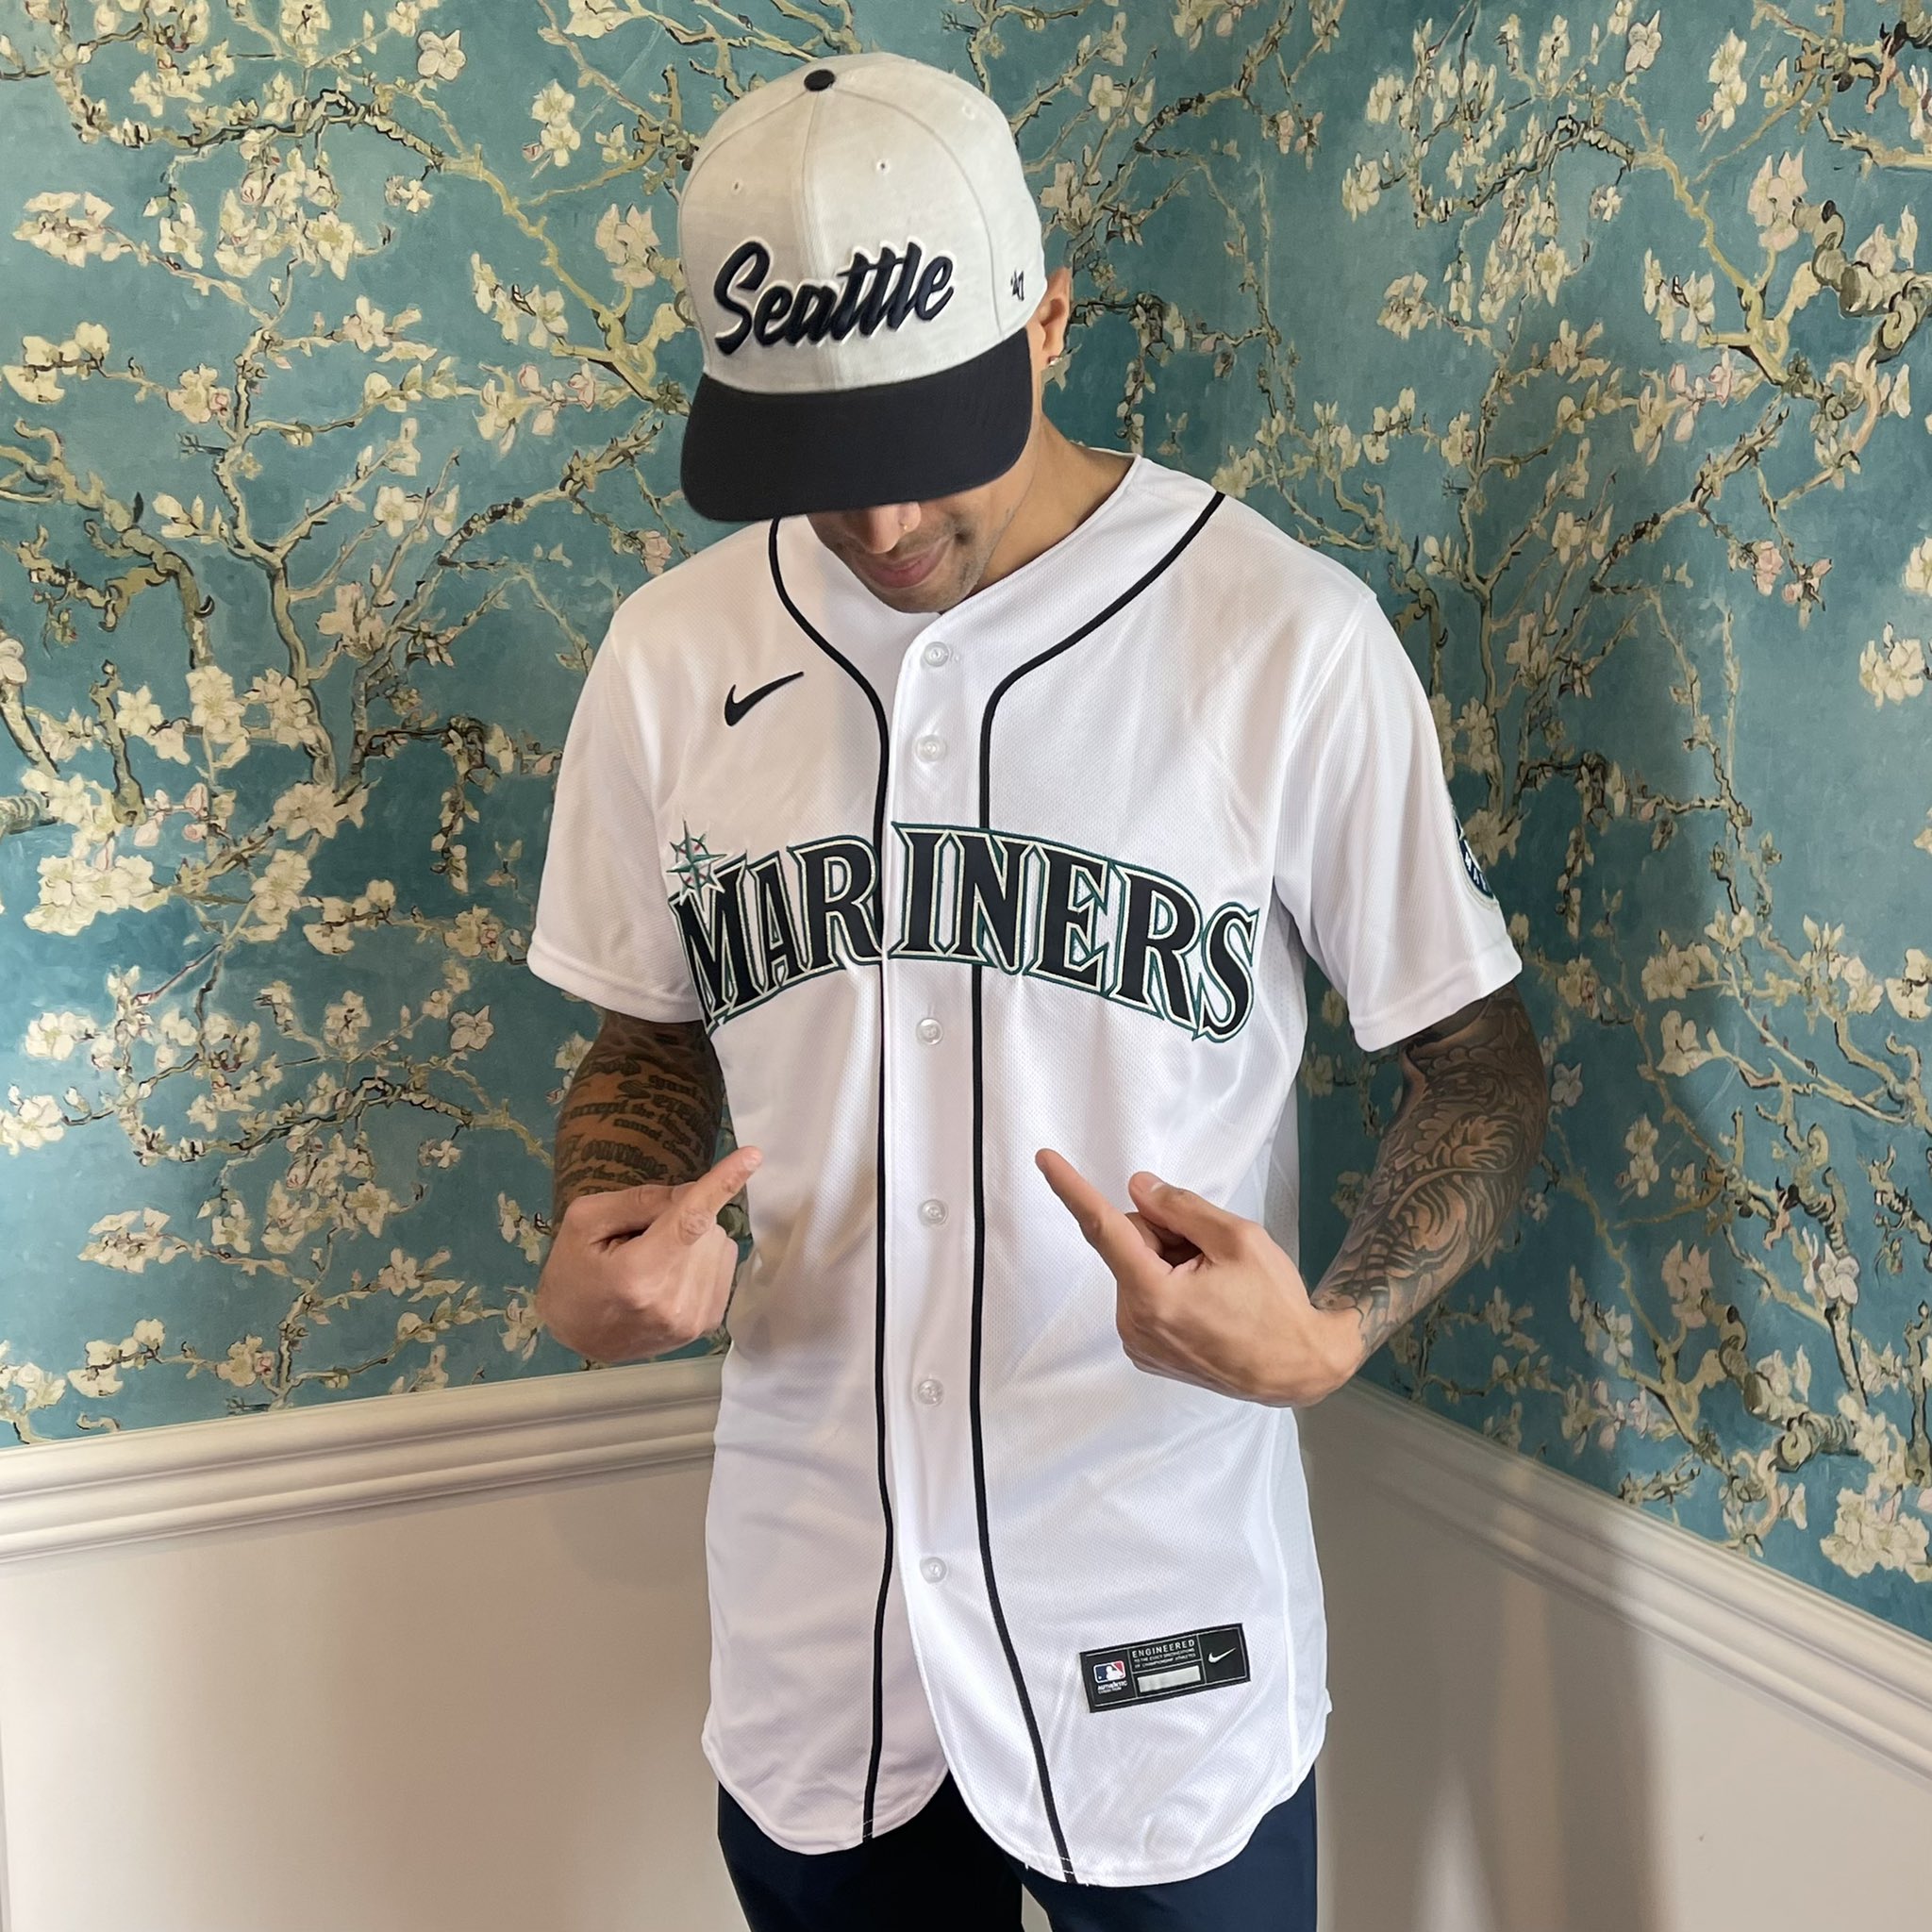 JT Brown on X: Thank you @Mariners for the new threads! Good luck this  season. Can't wait to catch a few games this off season. #seausrise   / X